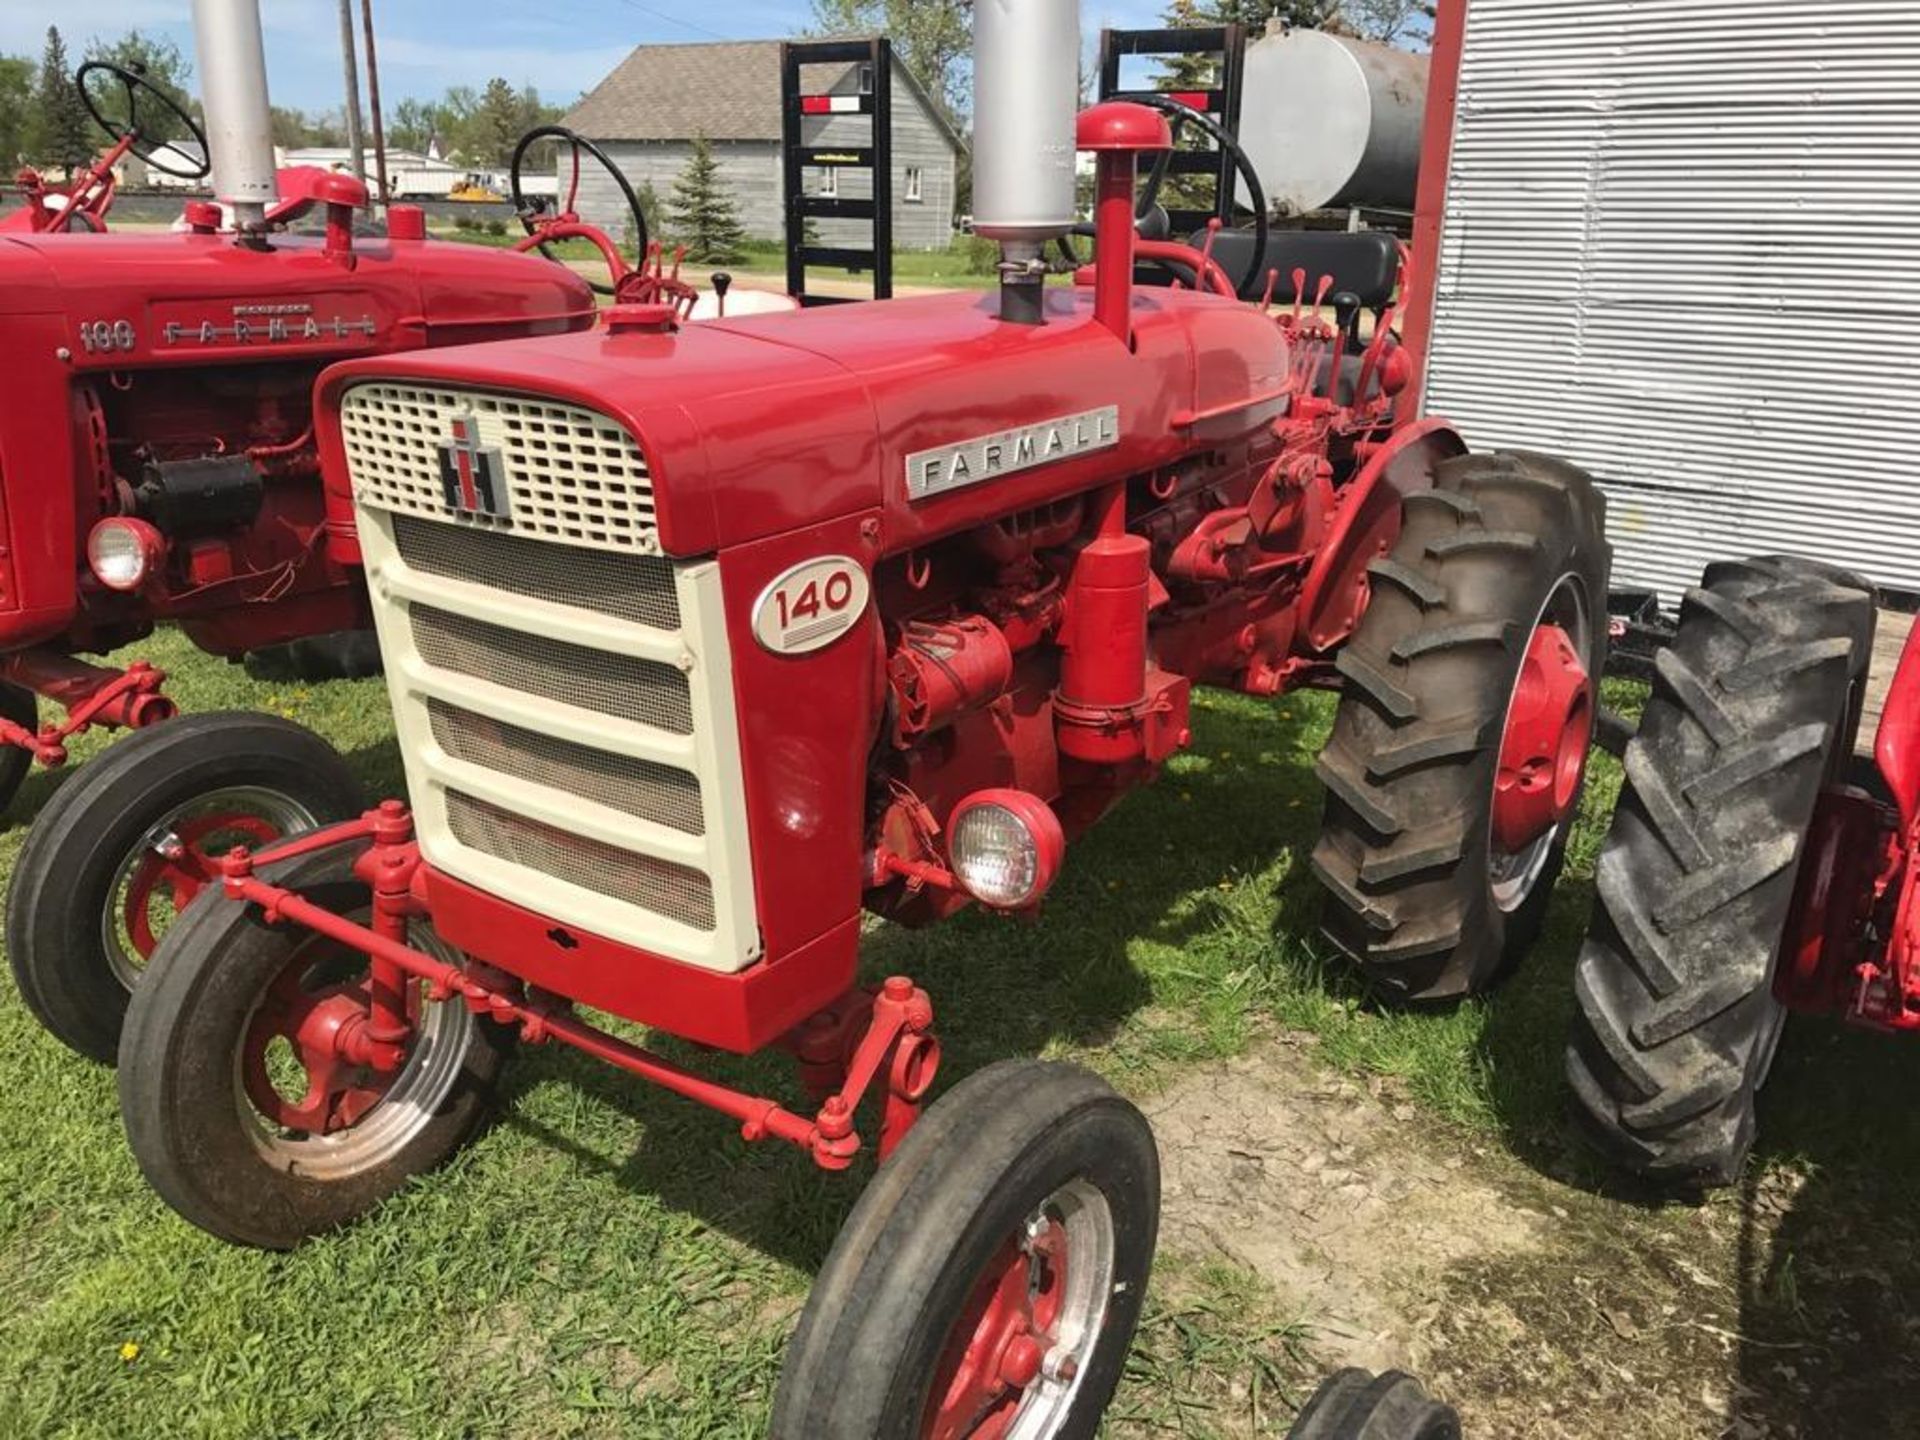 1958 Farmall 140, wide front, HYD, new tires - Image 3 of 3